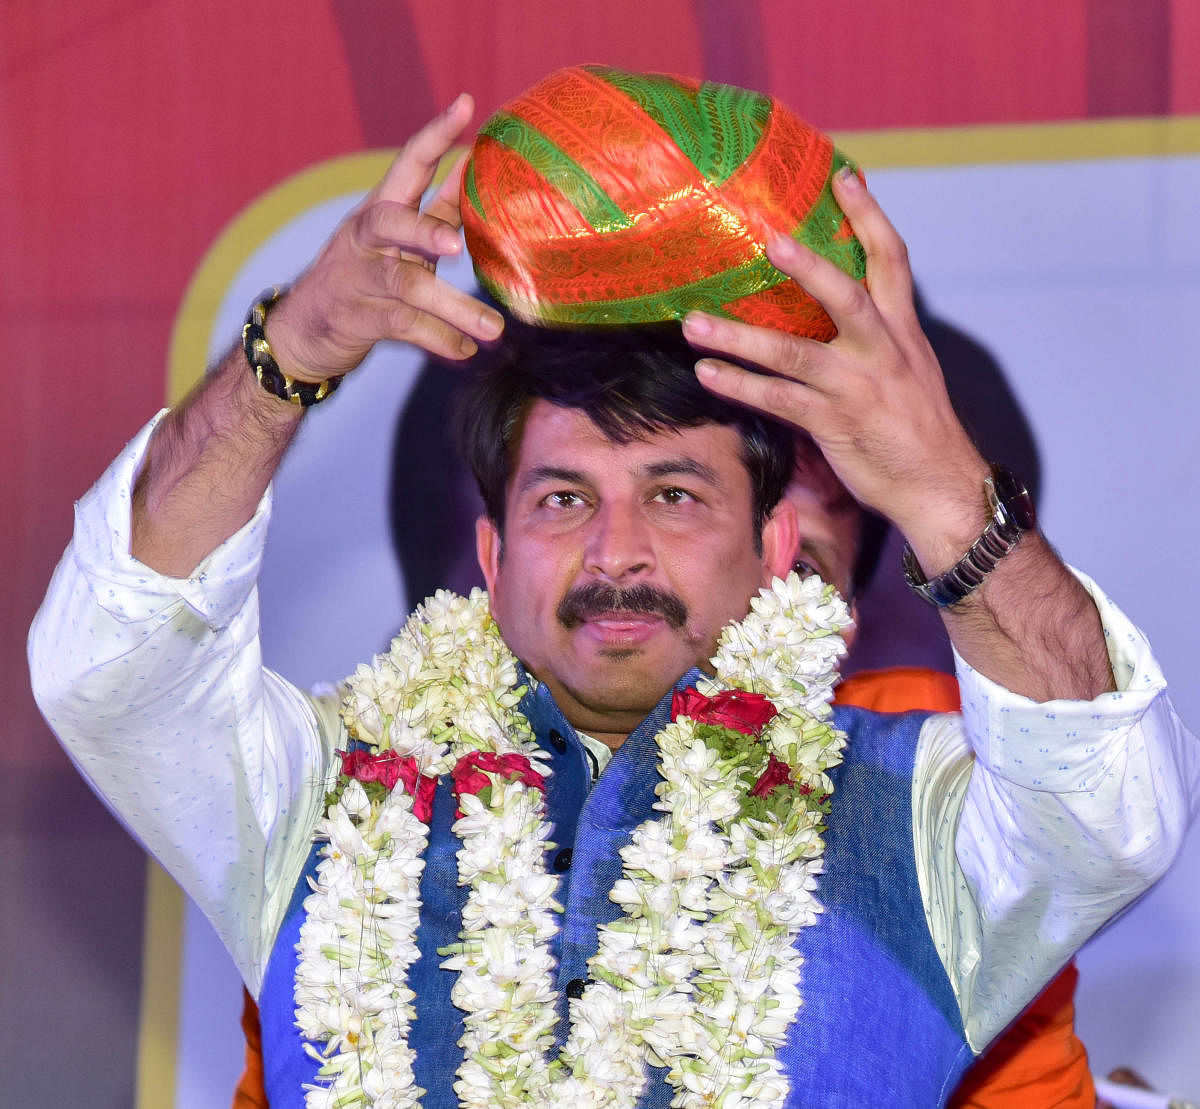 BJP Delhi president Manoj Tiwari said, "some people are deliberately trying to spread false news. 'Maryada Purushottam' Lord Ram is revered by all. There is no question of renaming Ramlila Maidan." (DH File Photo)